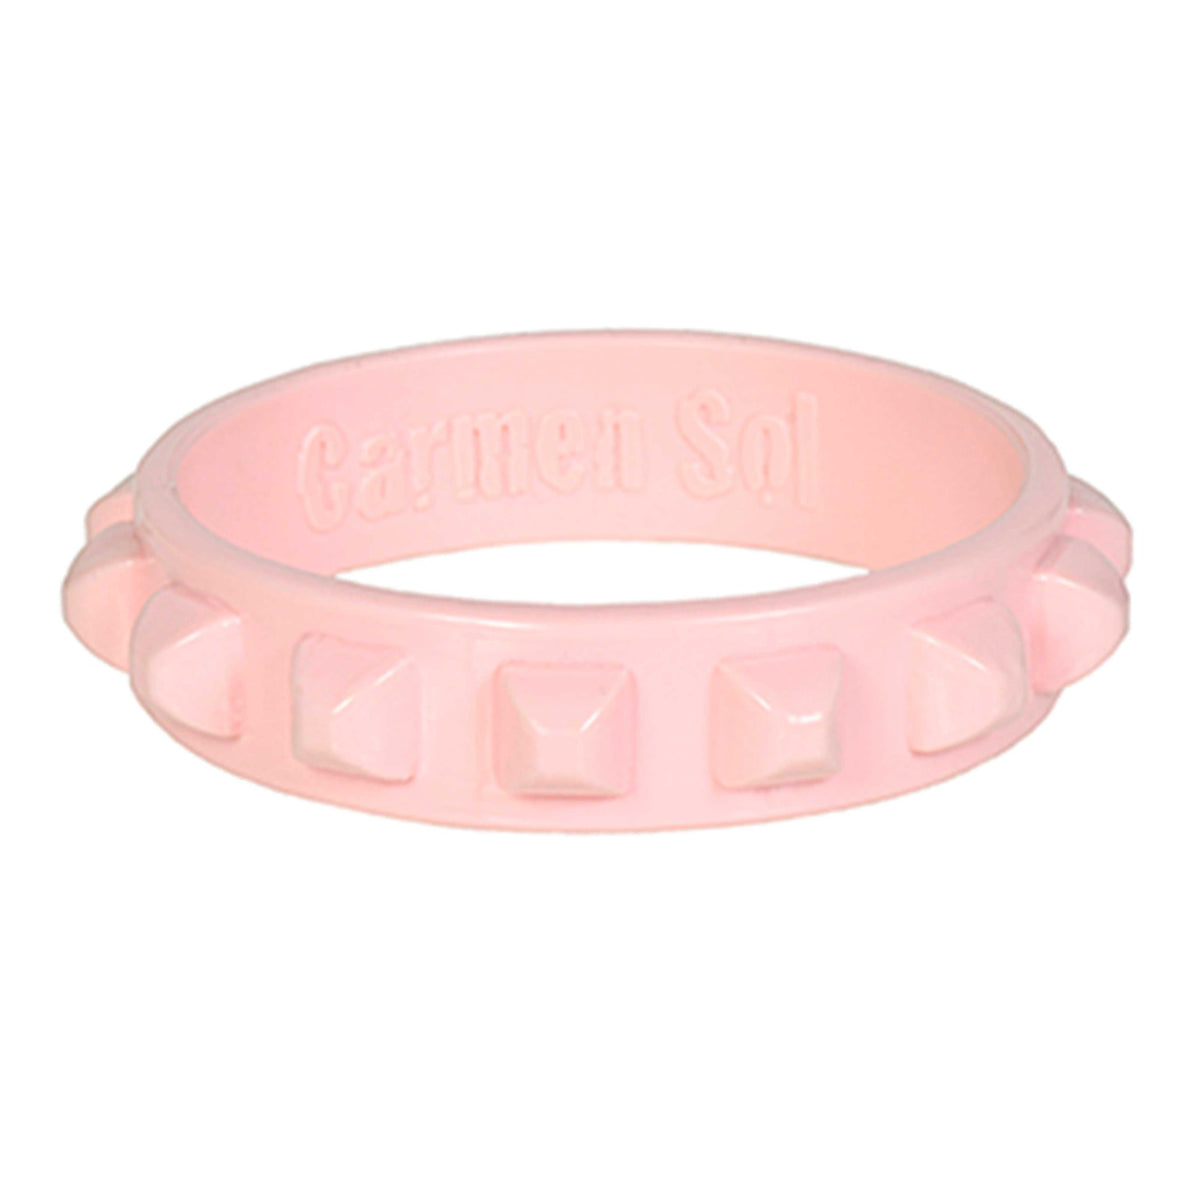 Baby pink jelly bracelets for womens